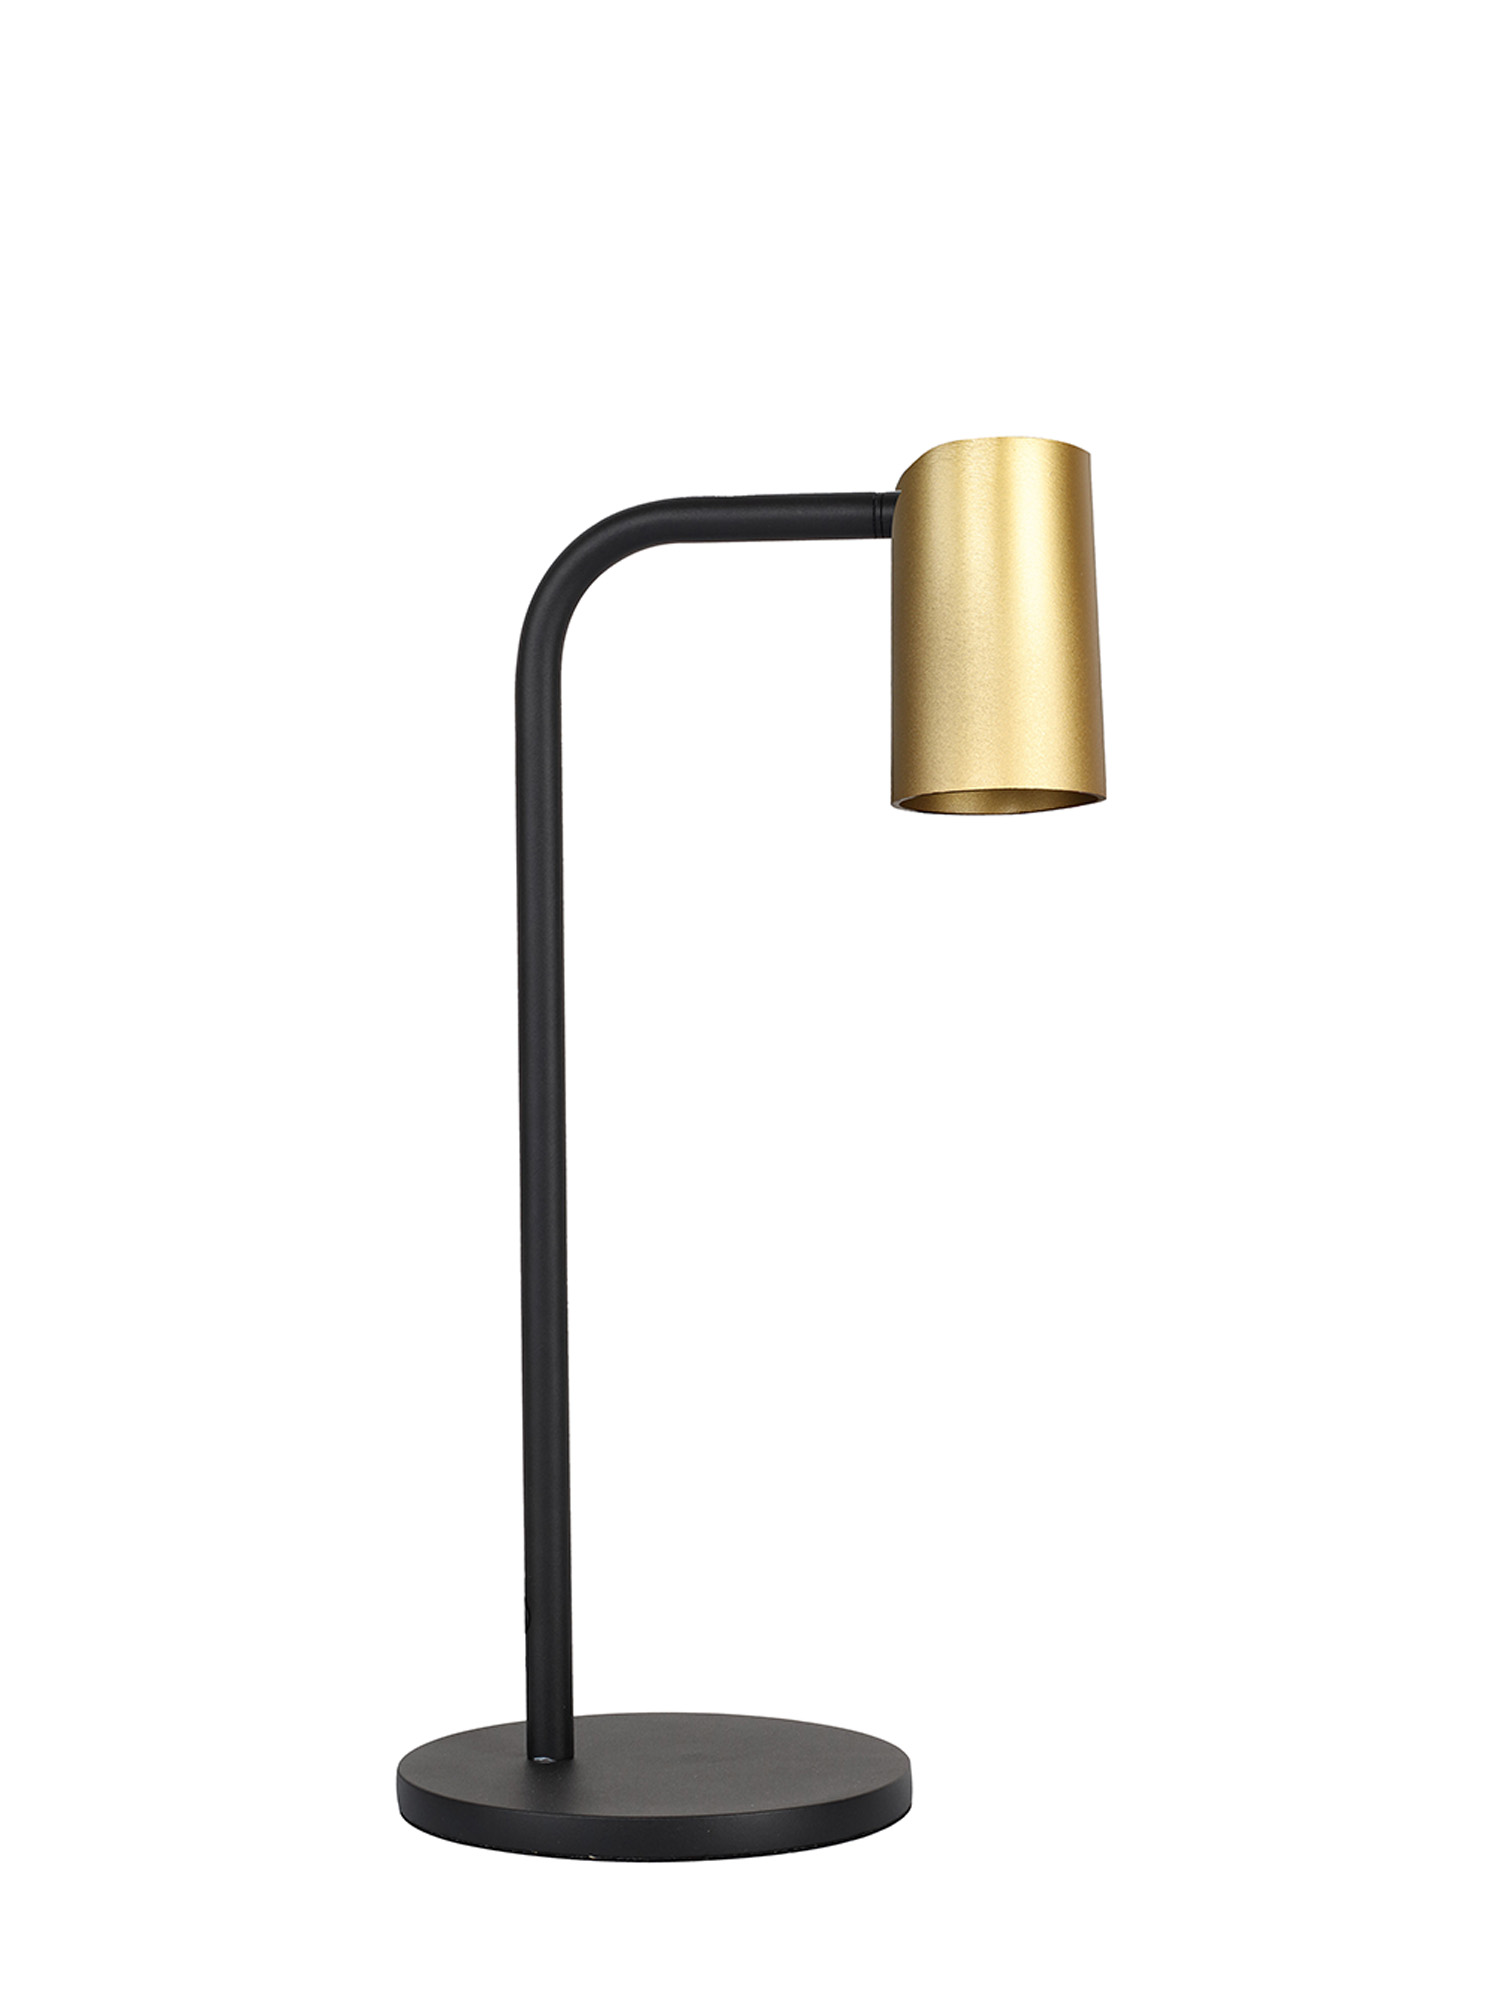 Sal Satin Gold Table Lamps Mantra Fusion Desk & Task Lamps